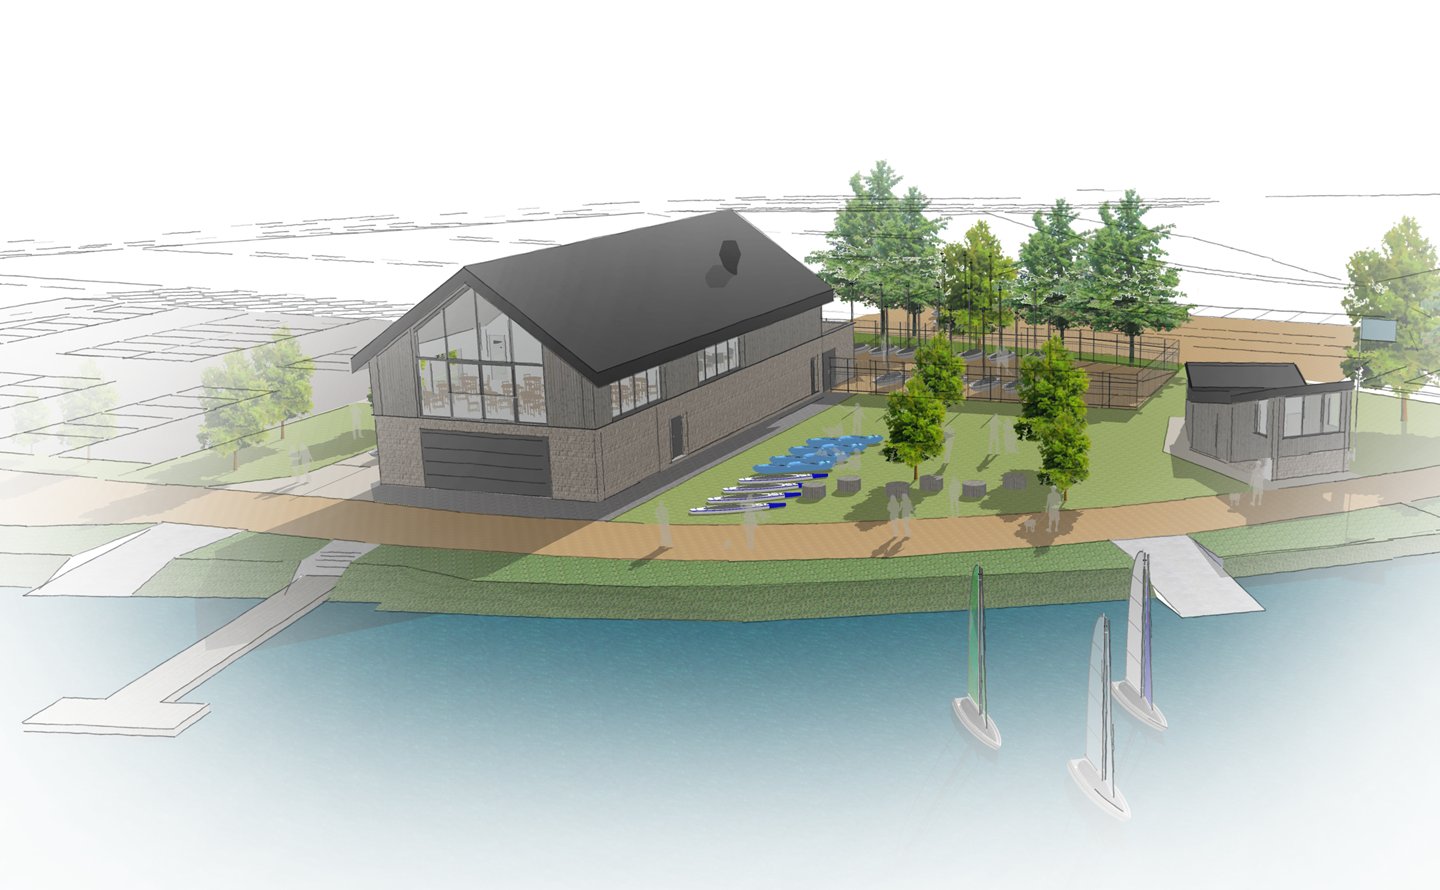 Artist's impressions of a new two storey building on the waters edge with trees and big windows